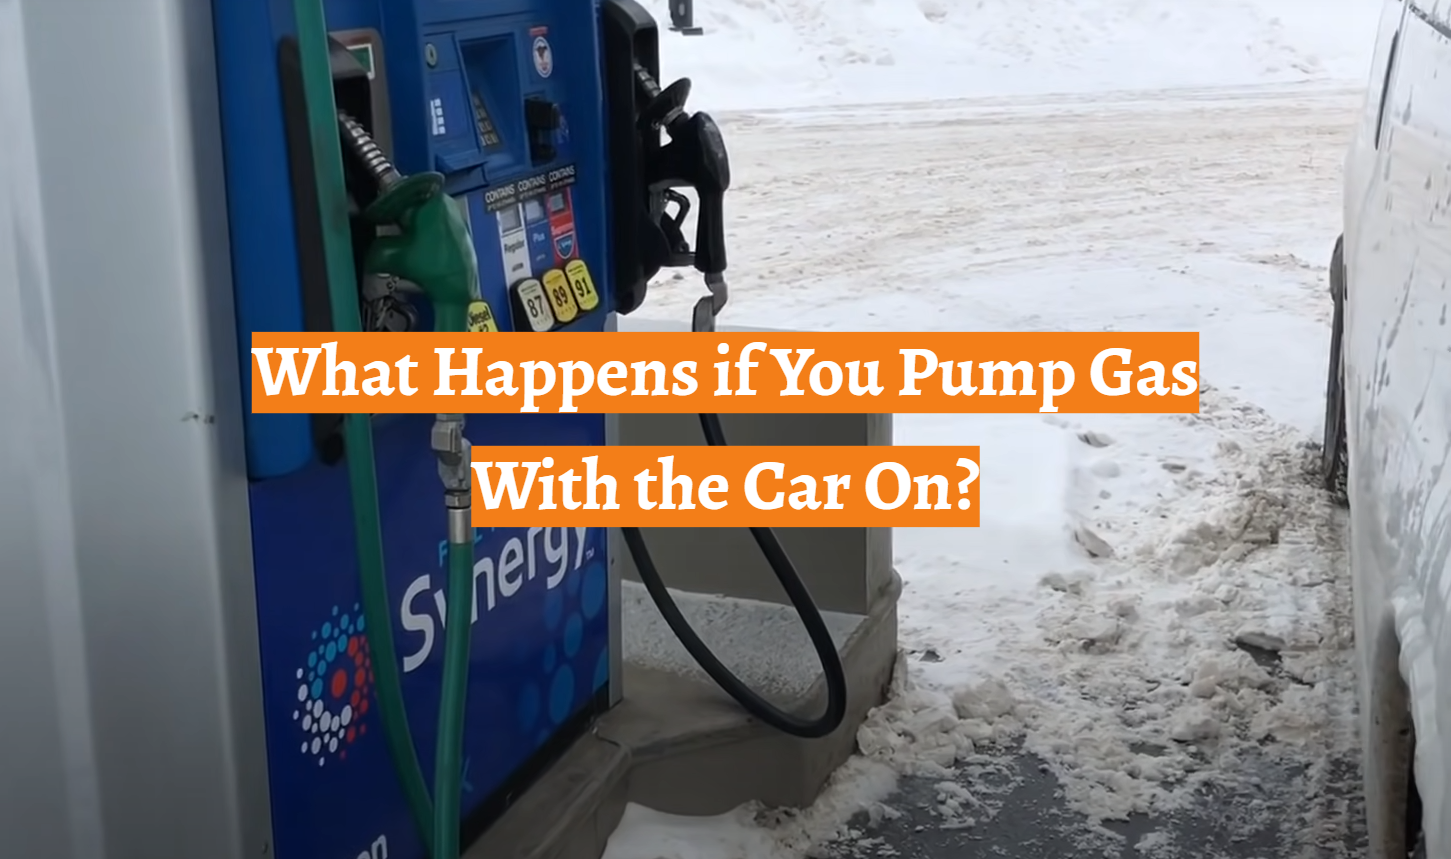 What Happens if You Pump Gas With the Car On?